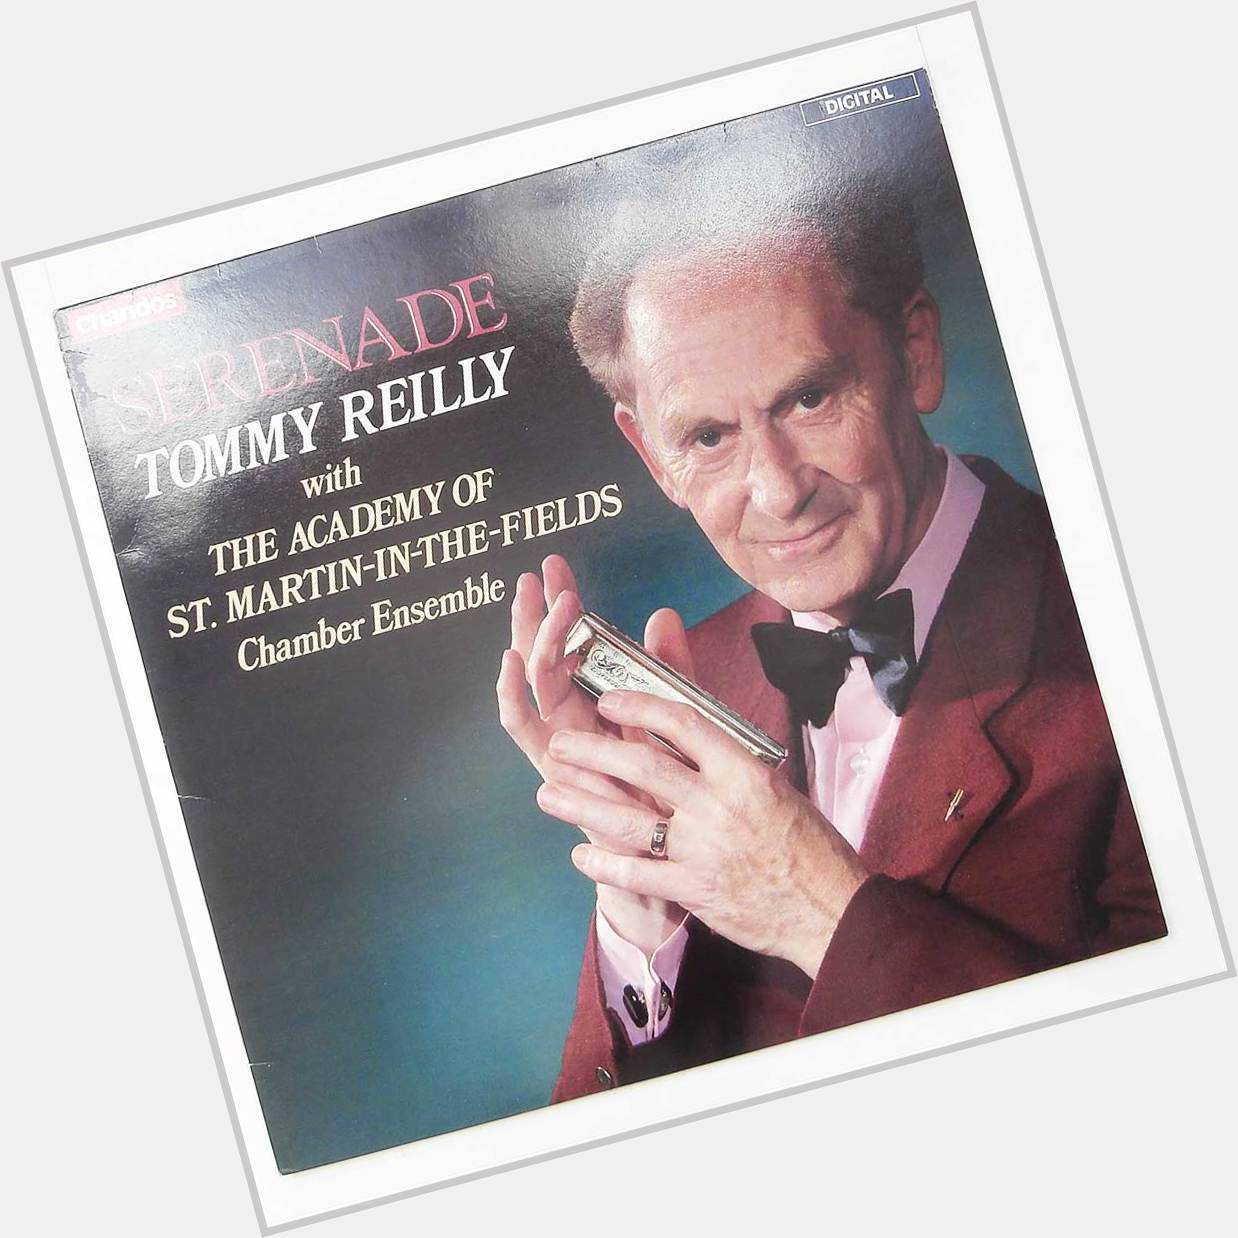 Https://fanpagepress.net/m/T/Tommy Reilly New Pic 1